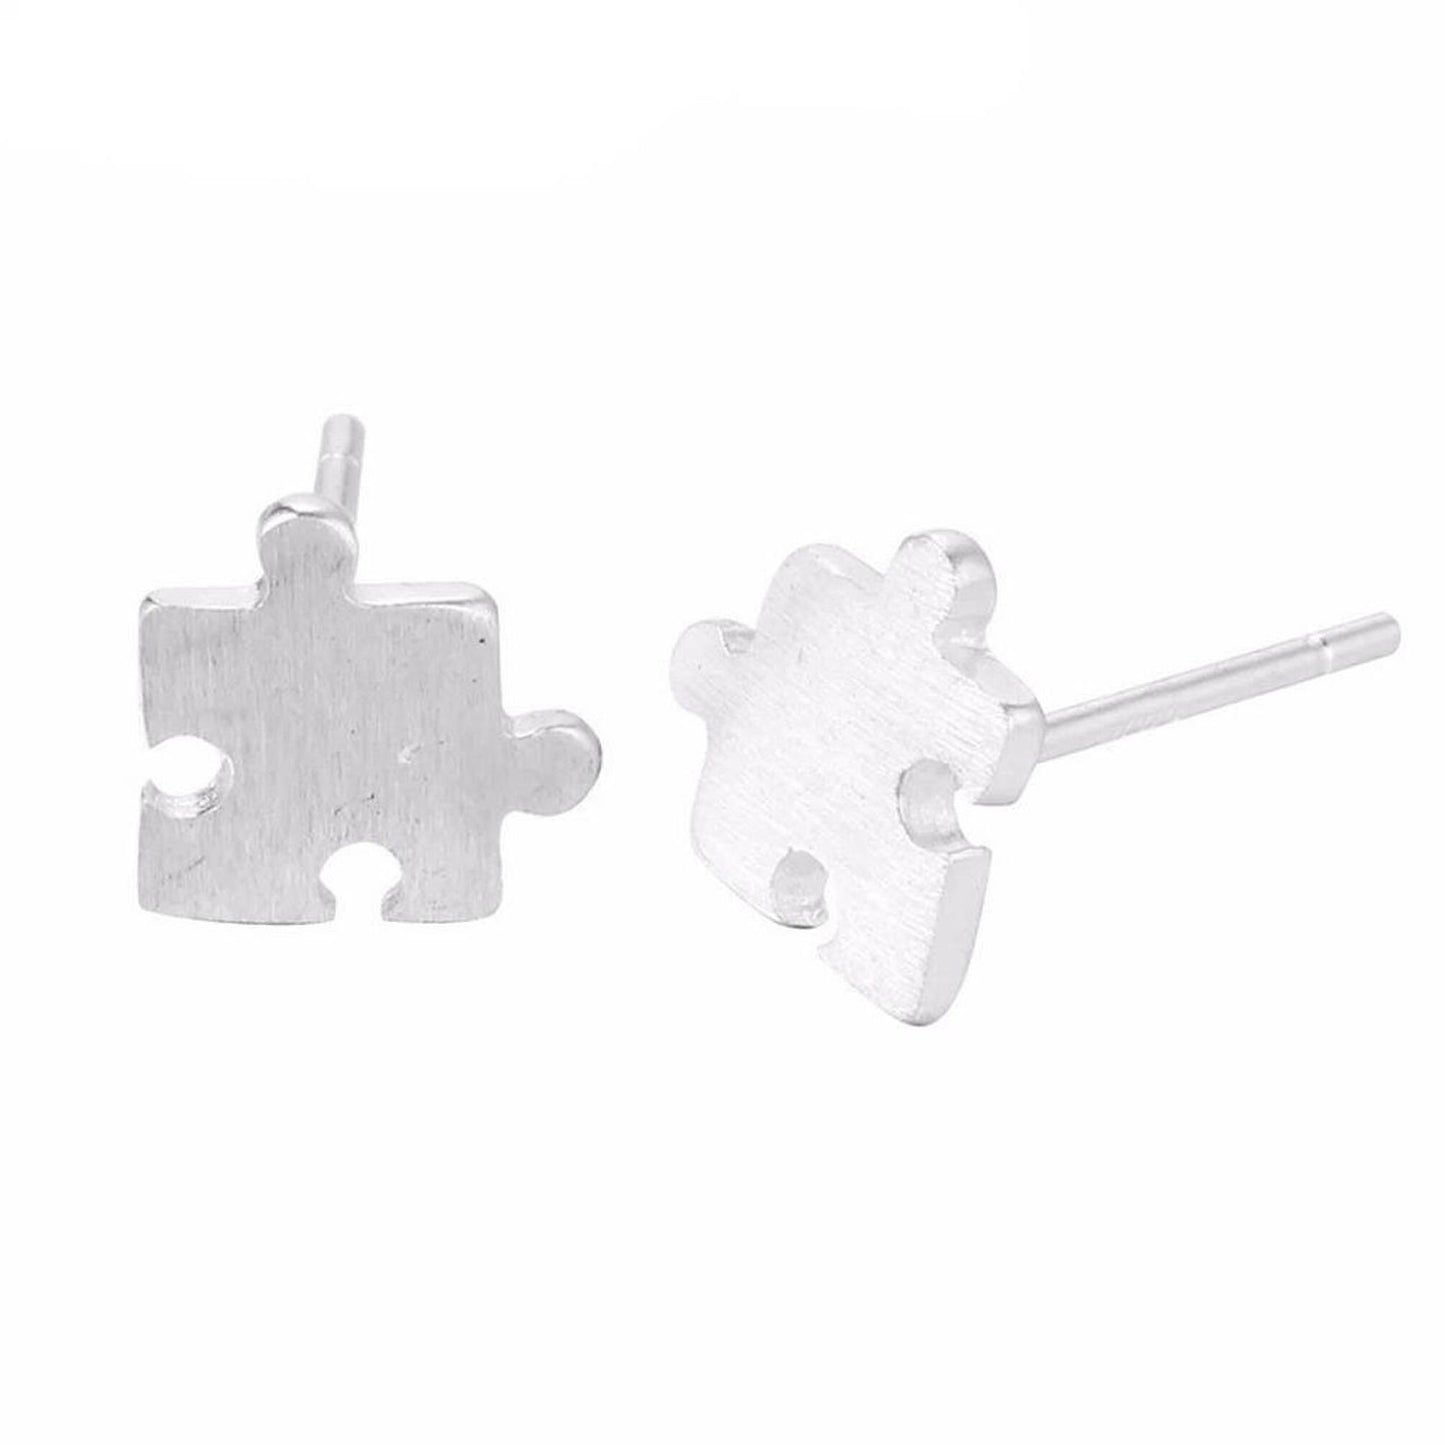 Sterling Silver Jigsaw Puzzle Piece Stud Earrings (2 slots) Sterling Silver Jigsaw Puzzle Piece Necklace Pendant